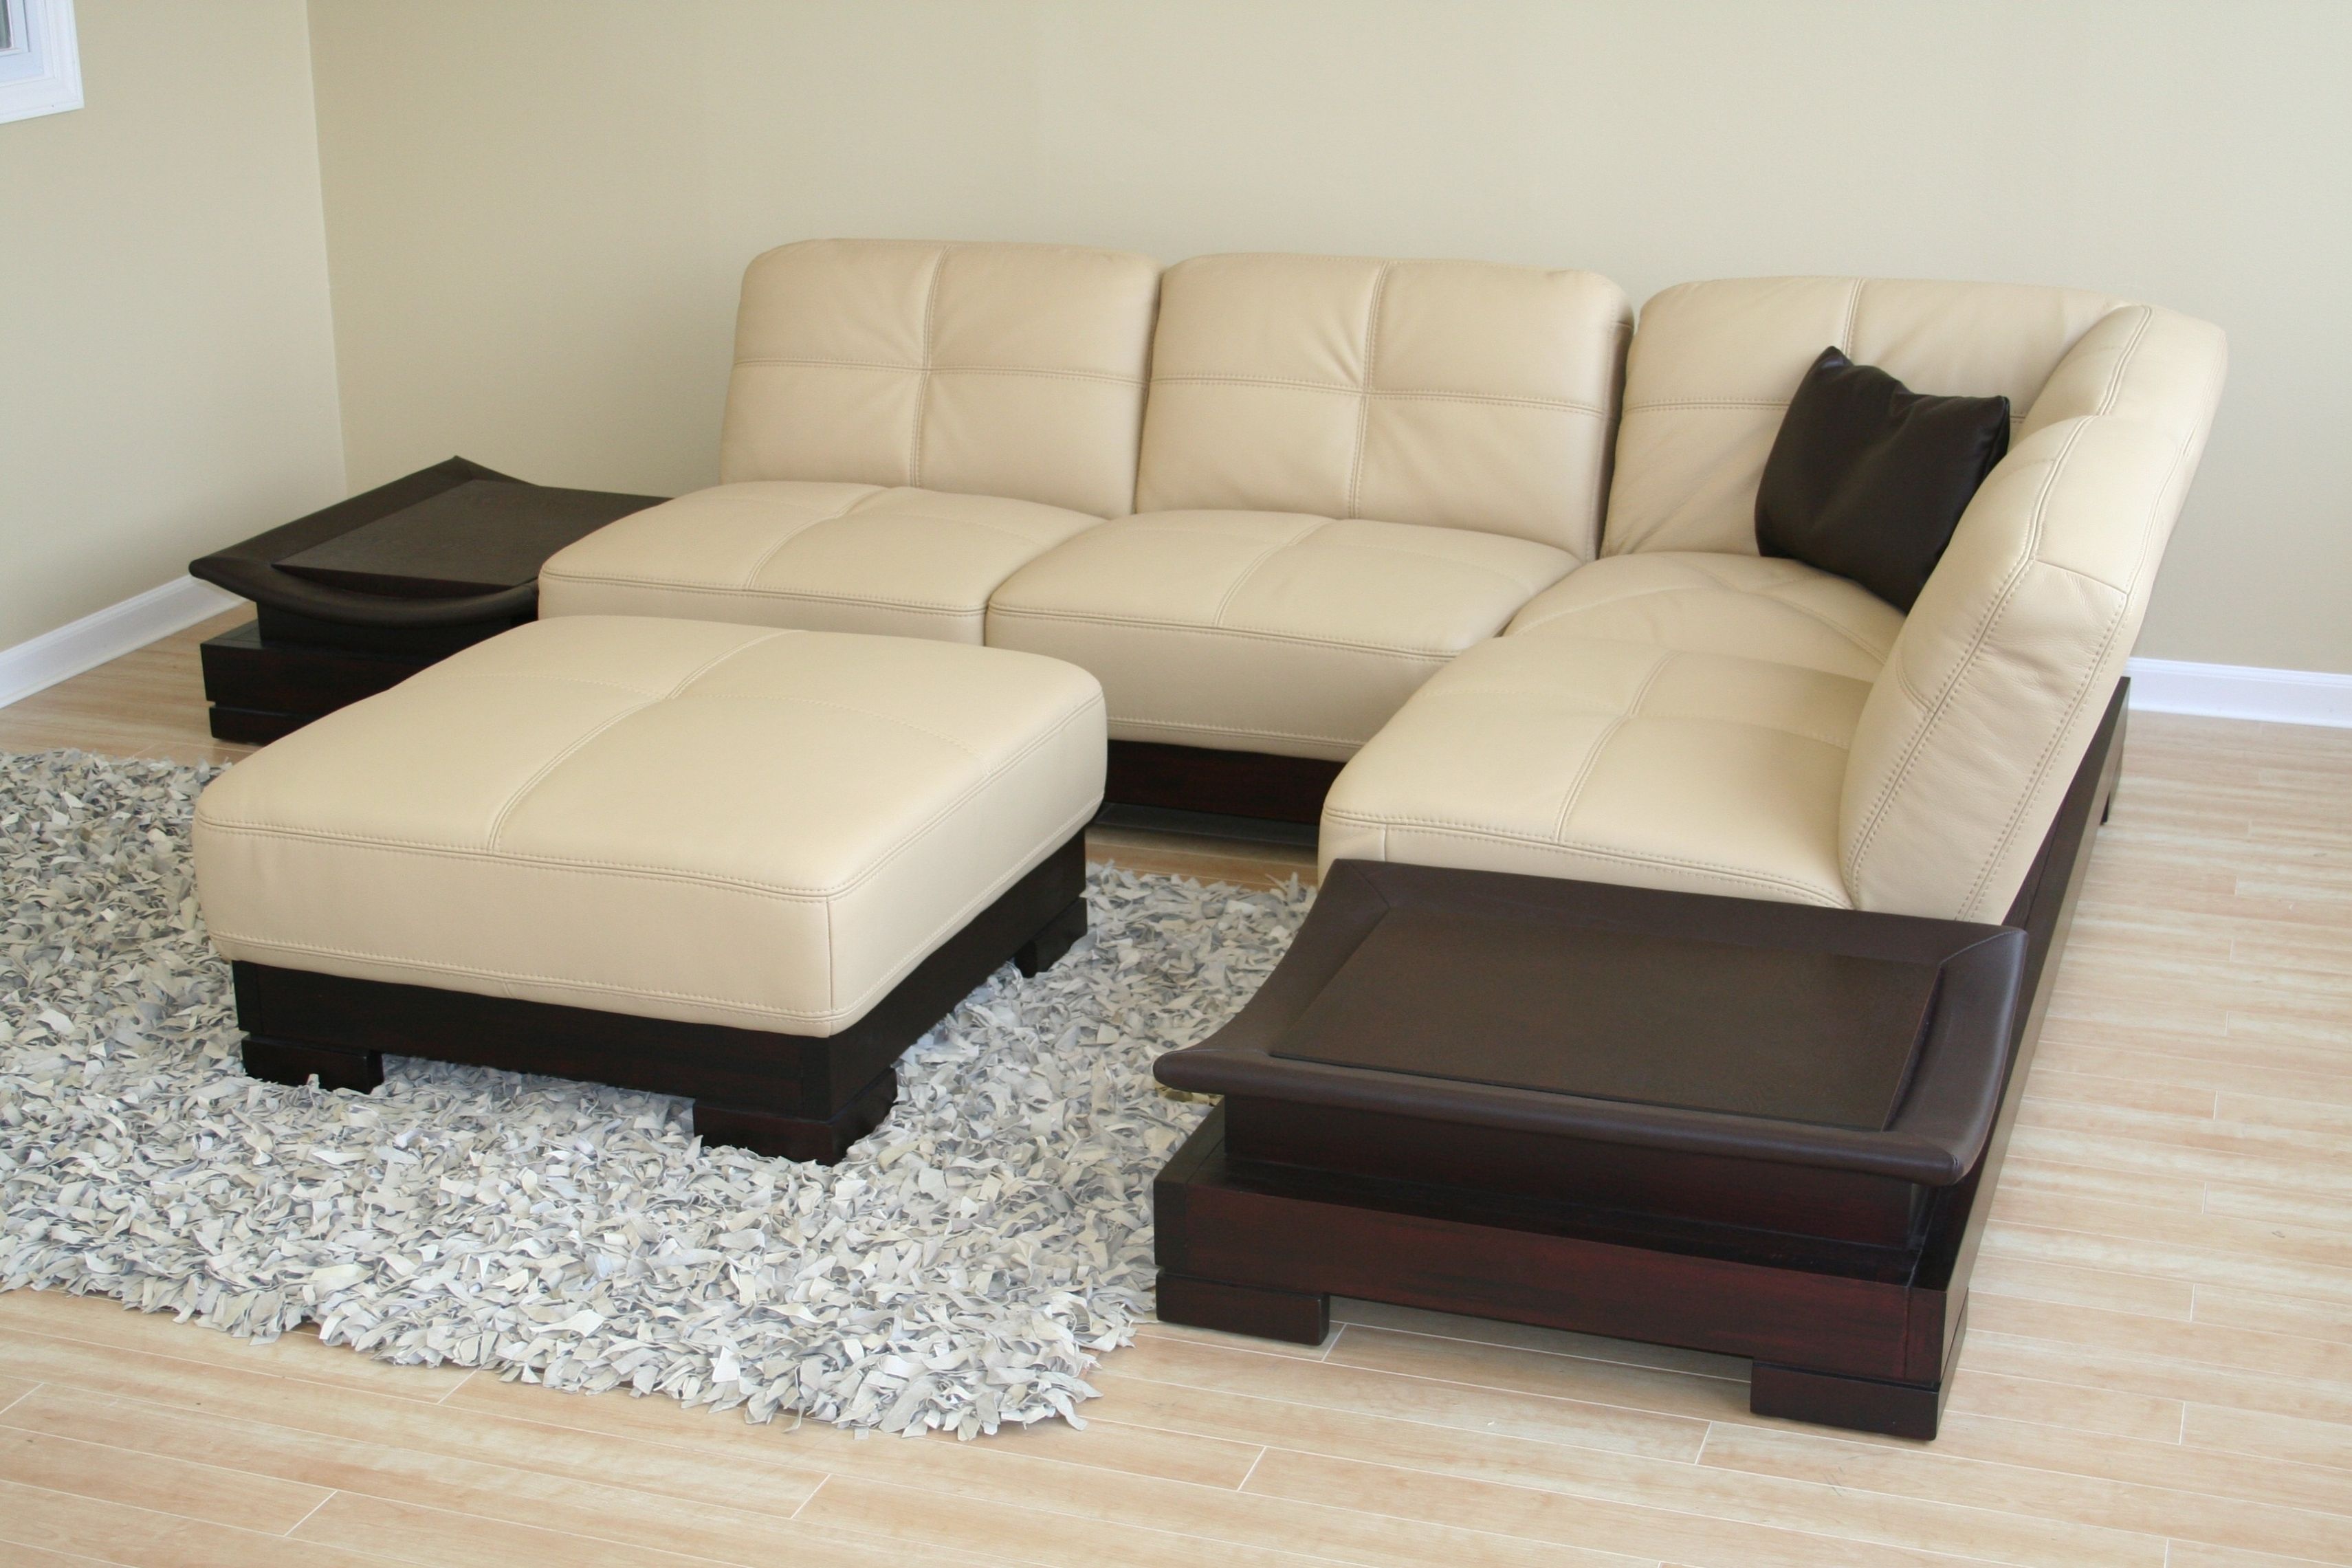 Living Room : Modular Sofas For Small Spaces Small Sectional Sofas With Regard To Most Recent Small Modular Sectional Sofas (View 19 of 20)